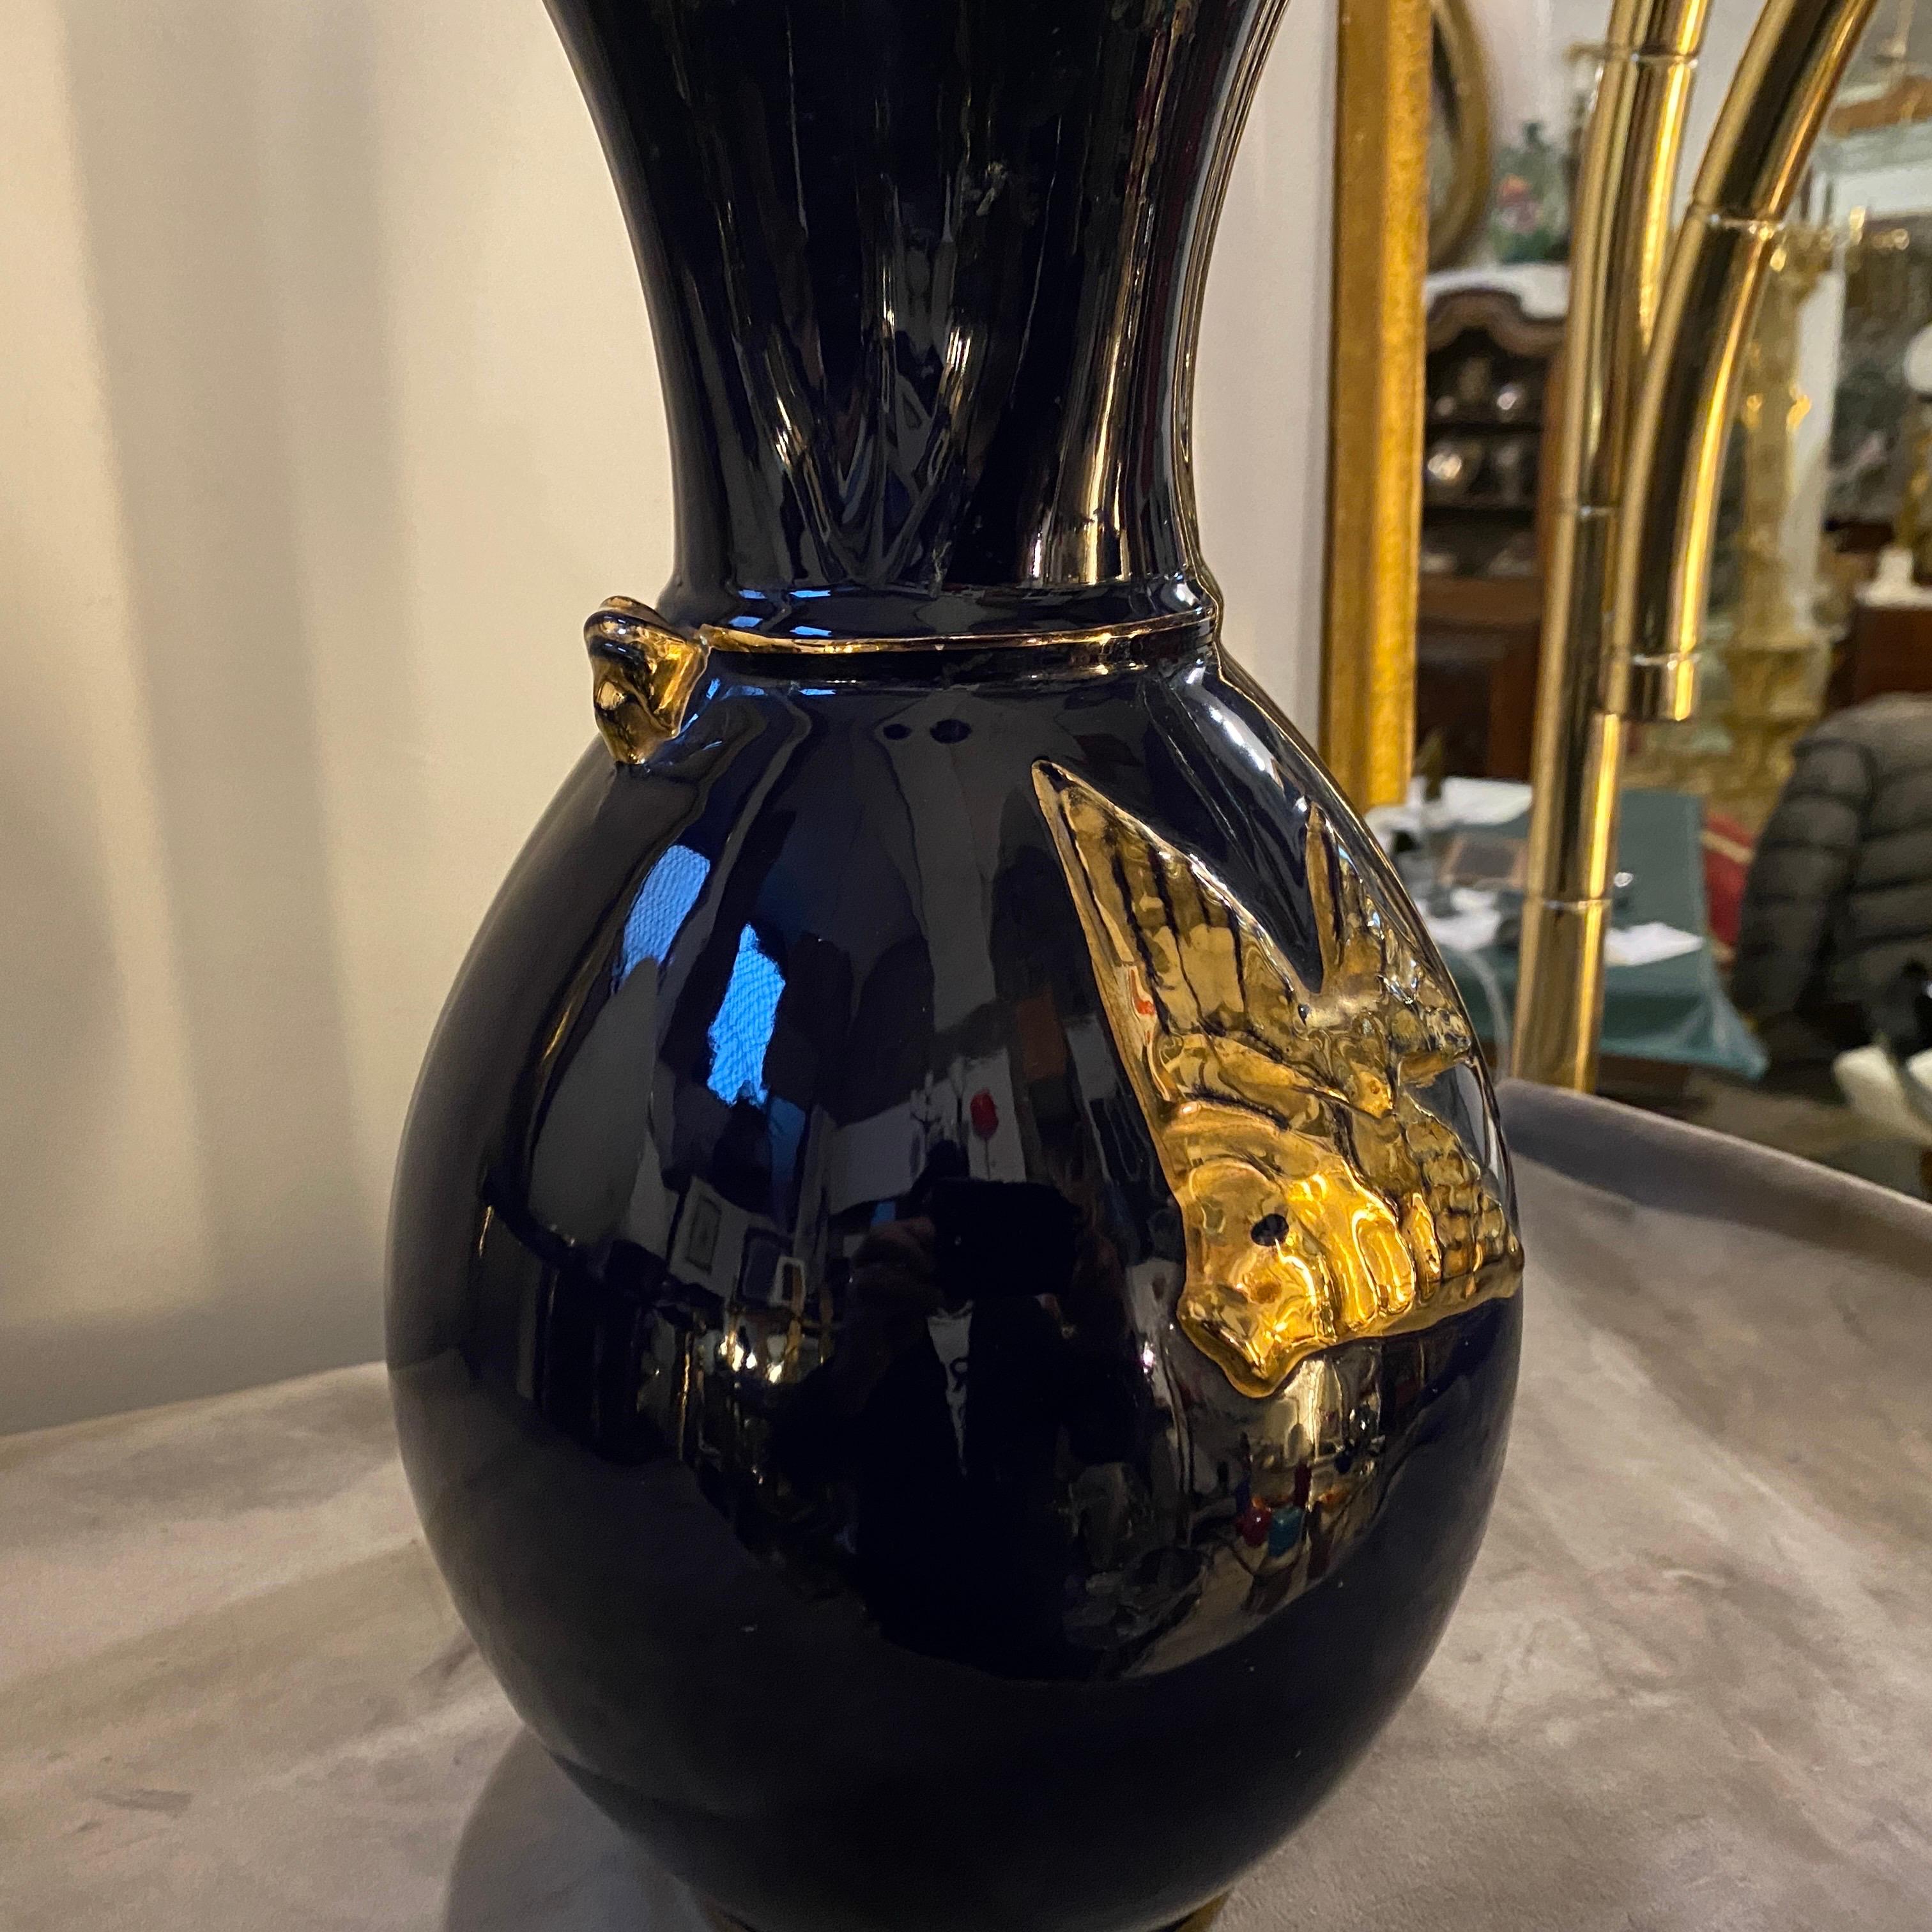 1950s Mid-Century Modern Blue and Gold Ceramic Italian Vase by Icap For Sale 3